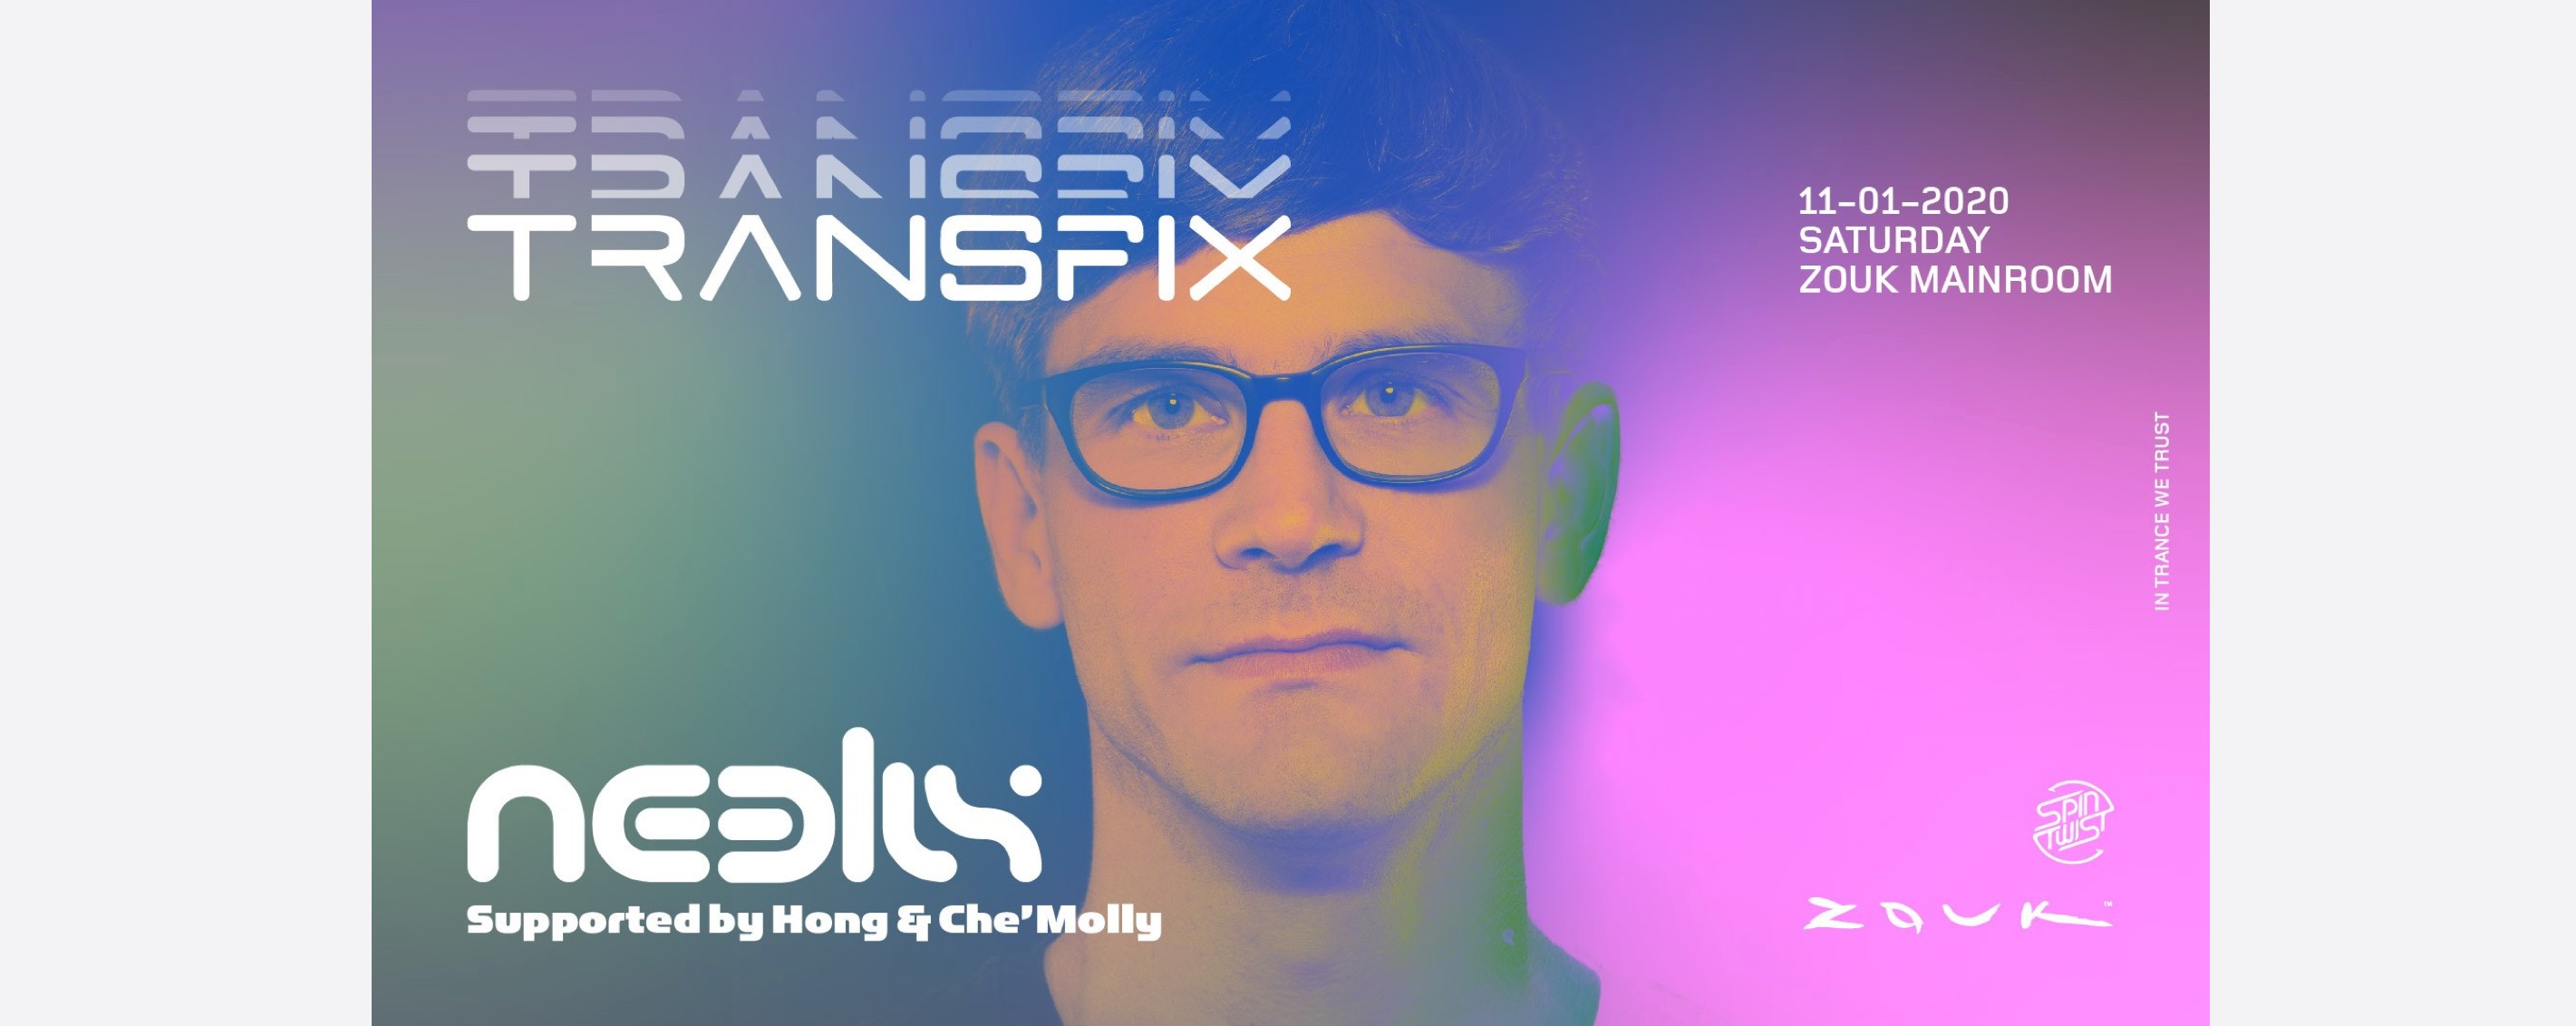 Transfix presents Neelix, supported by Hong & Che’Molly